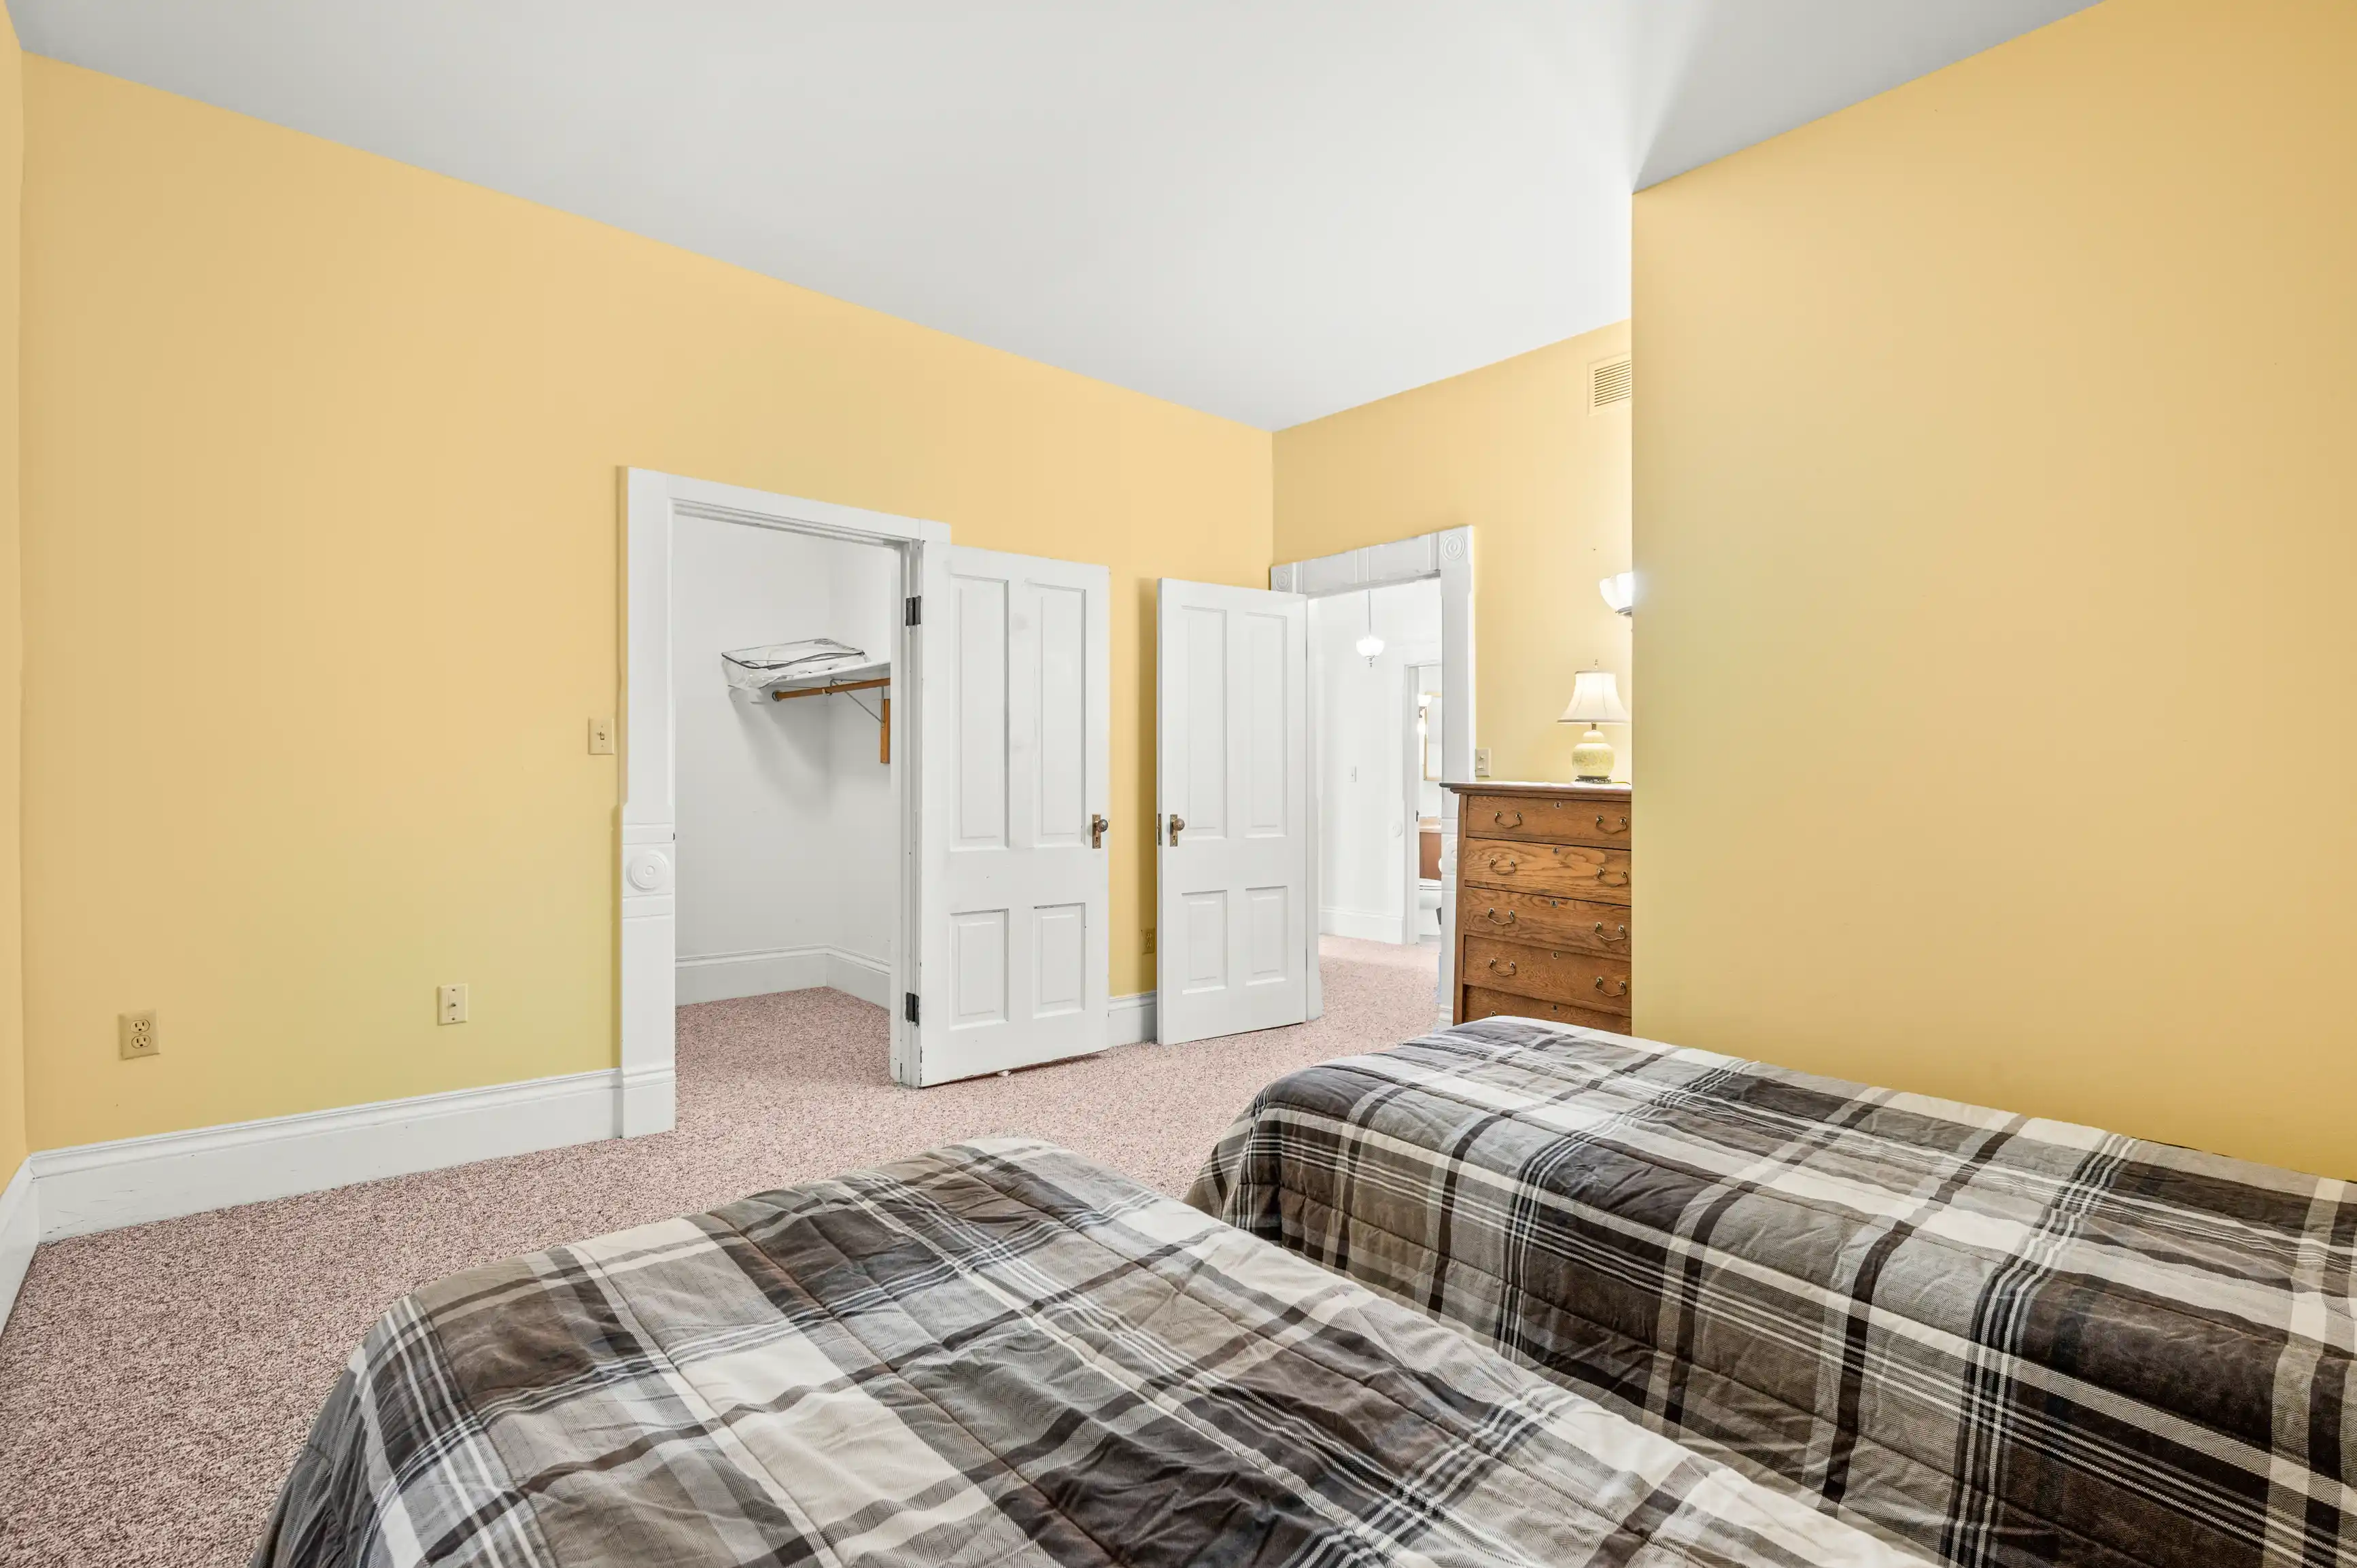 A well-lit bedroom with yellow walls, two plaid beds, an open closet, an ironing board, and wooden furniture.